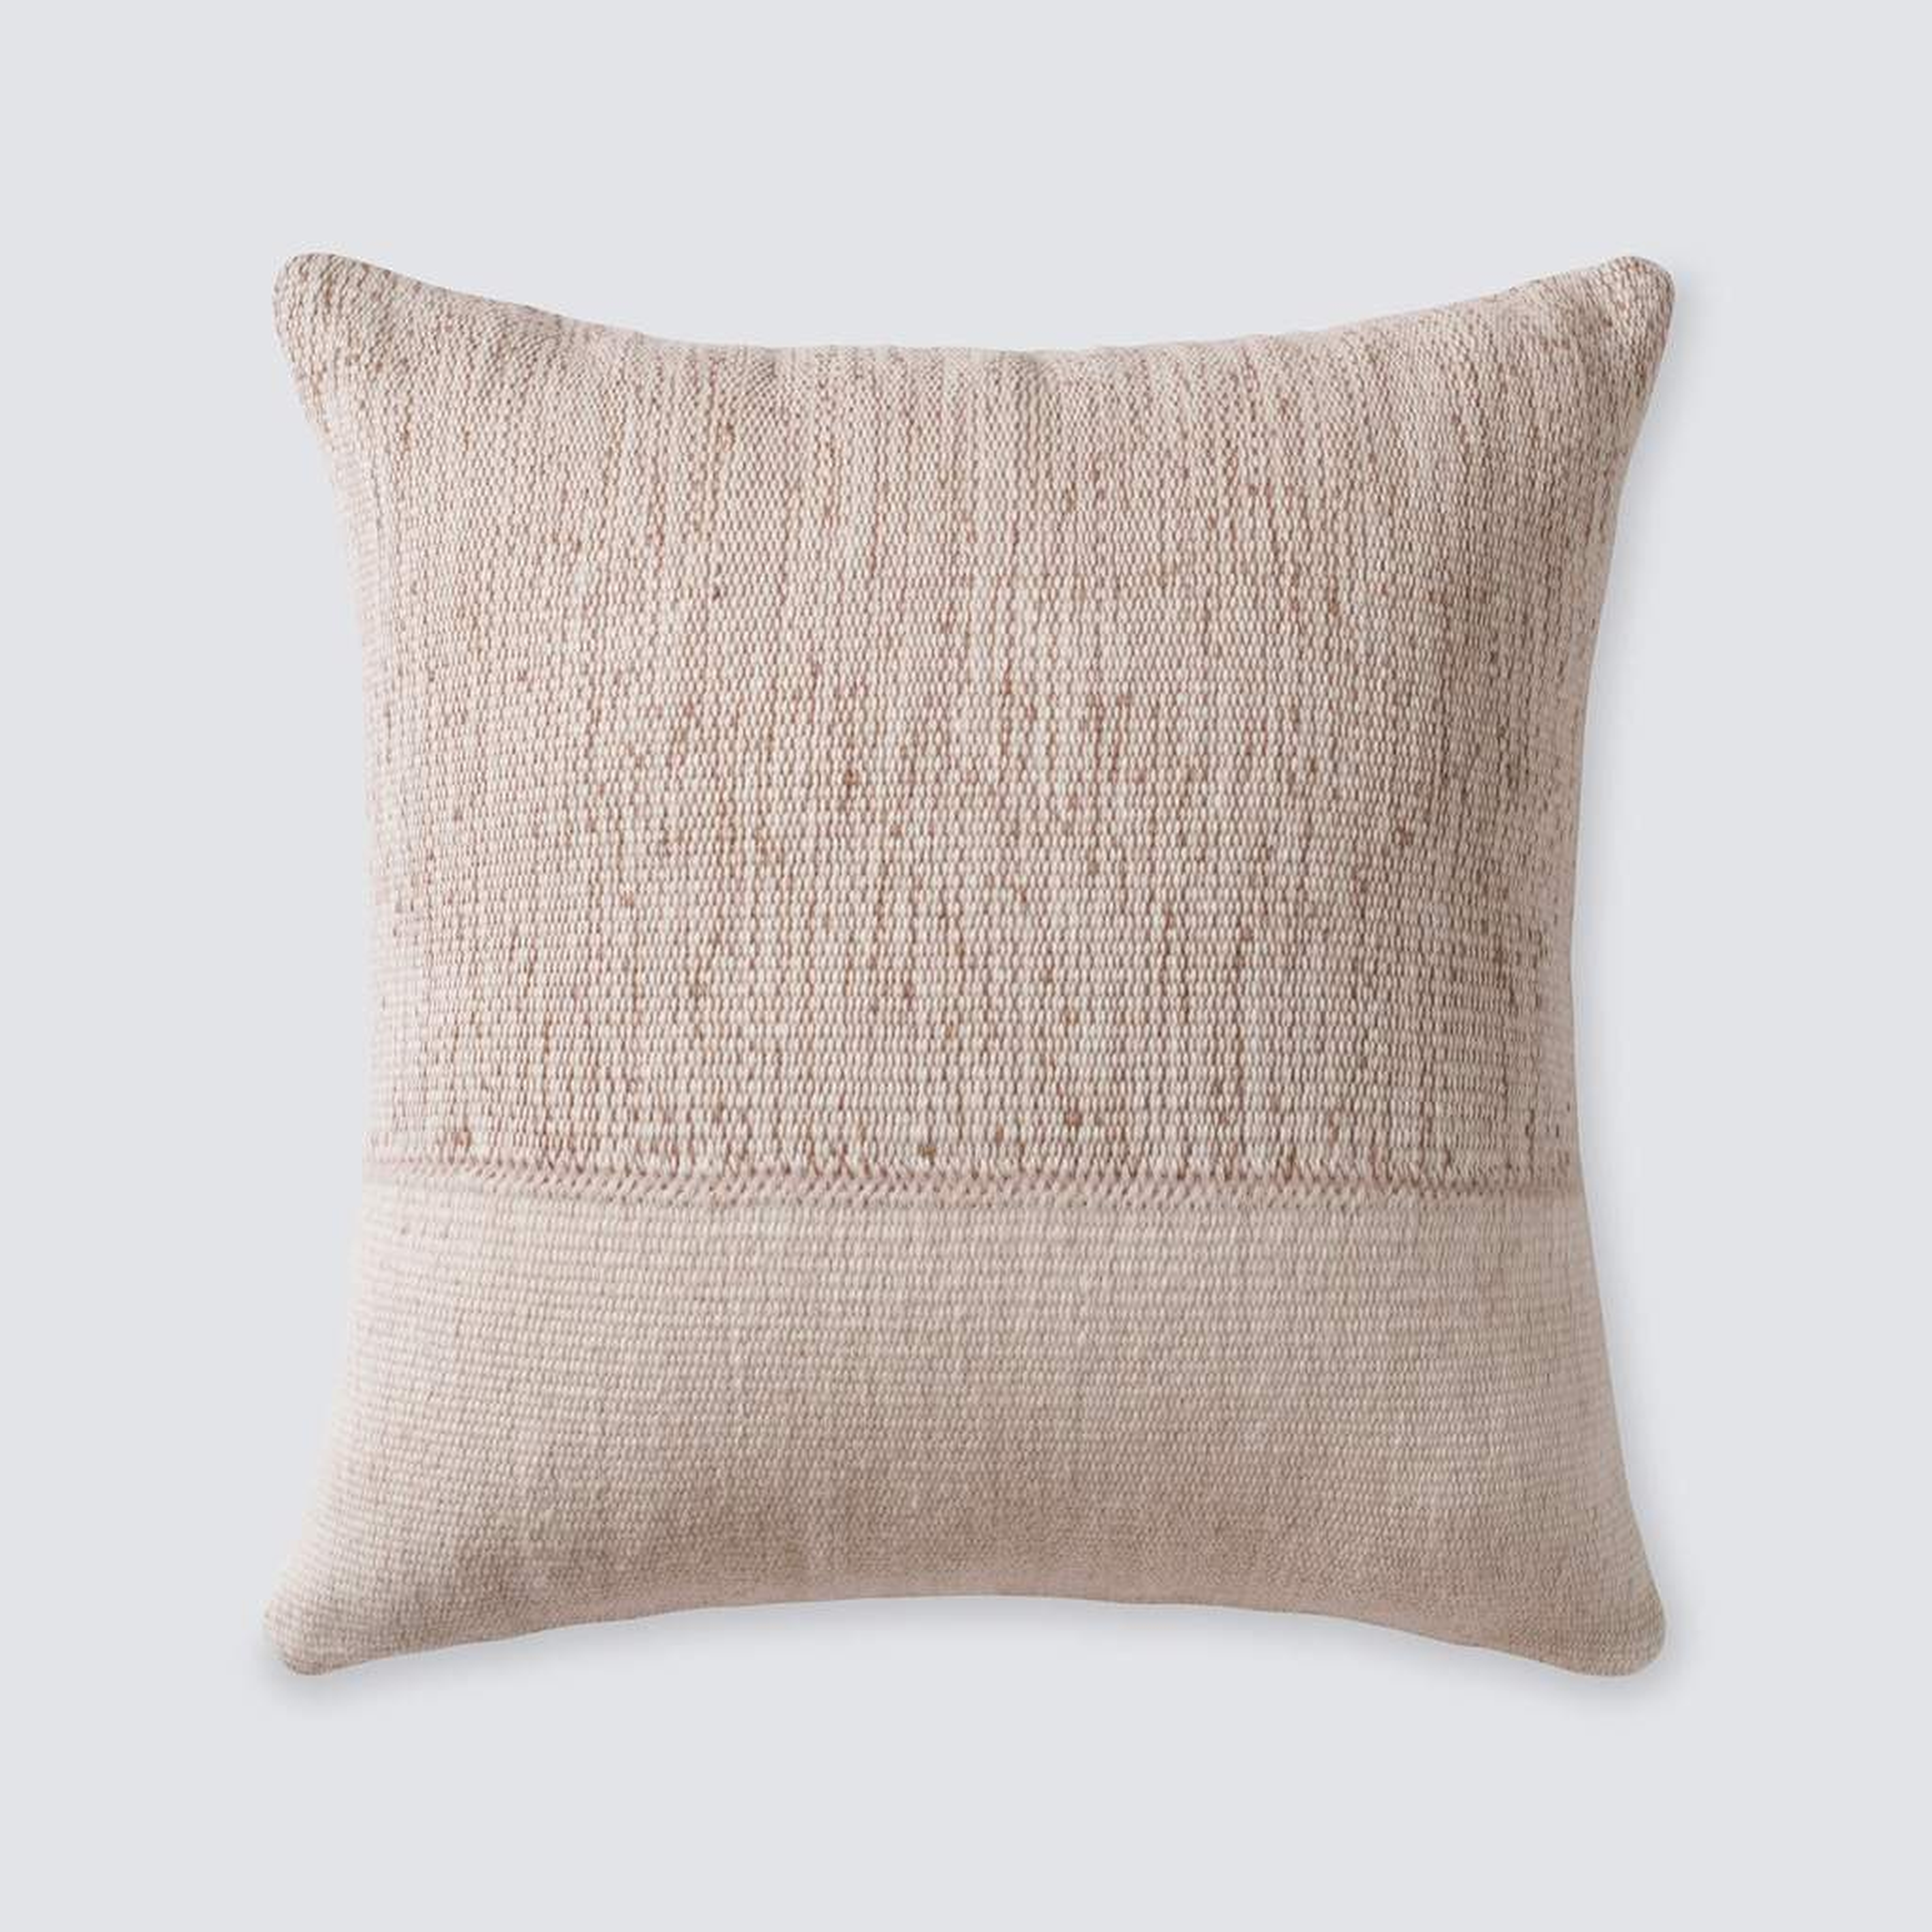 Claro Pillow - Camel - 22 in. x 22 in. By The Citizenry - The Citizenry